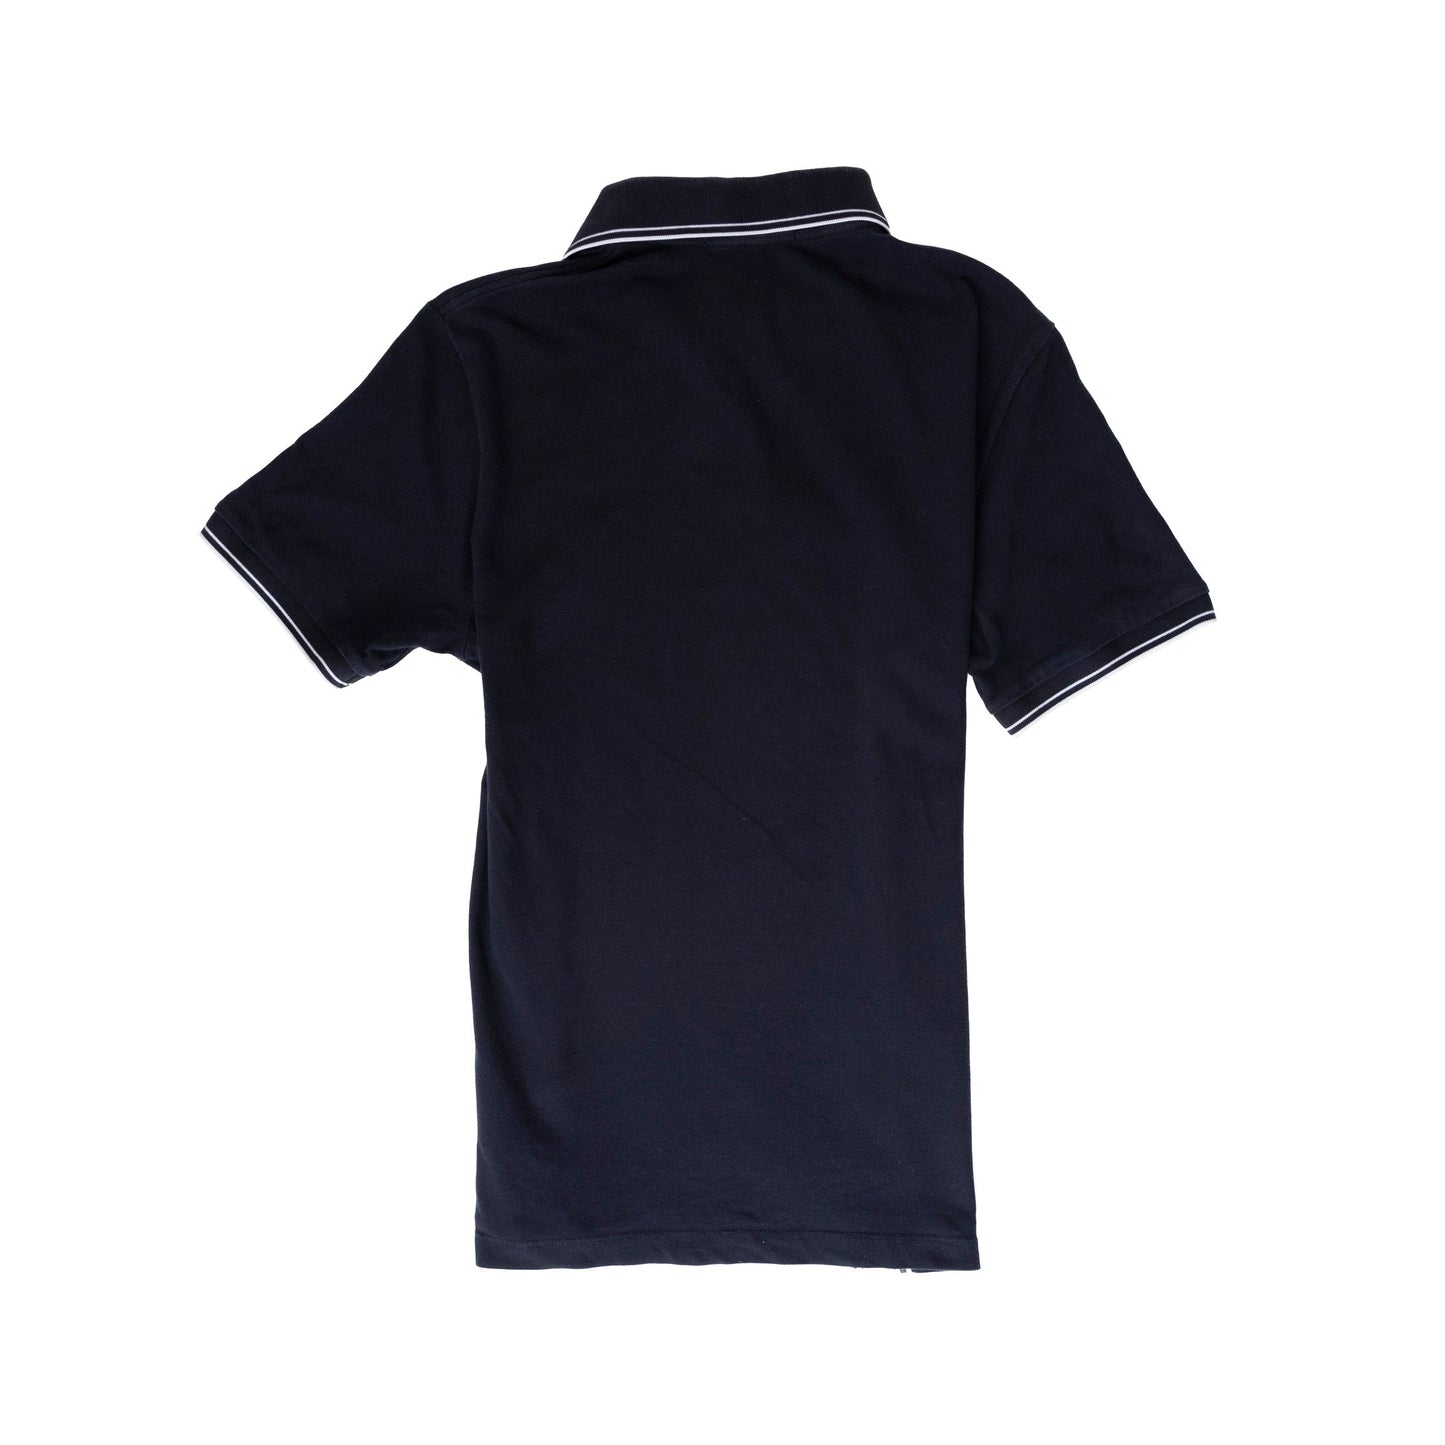 Stone Island Re-Issue Navy Polo Shirt